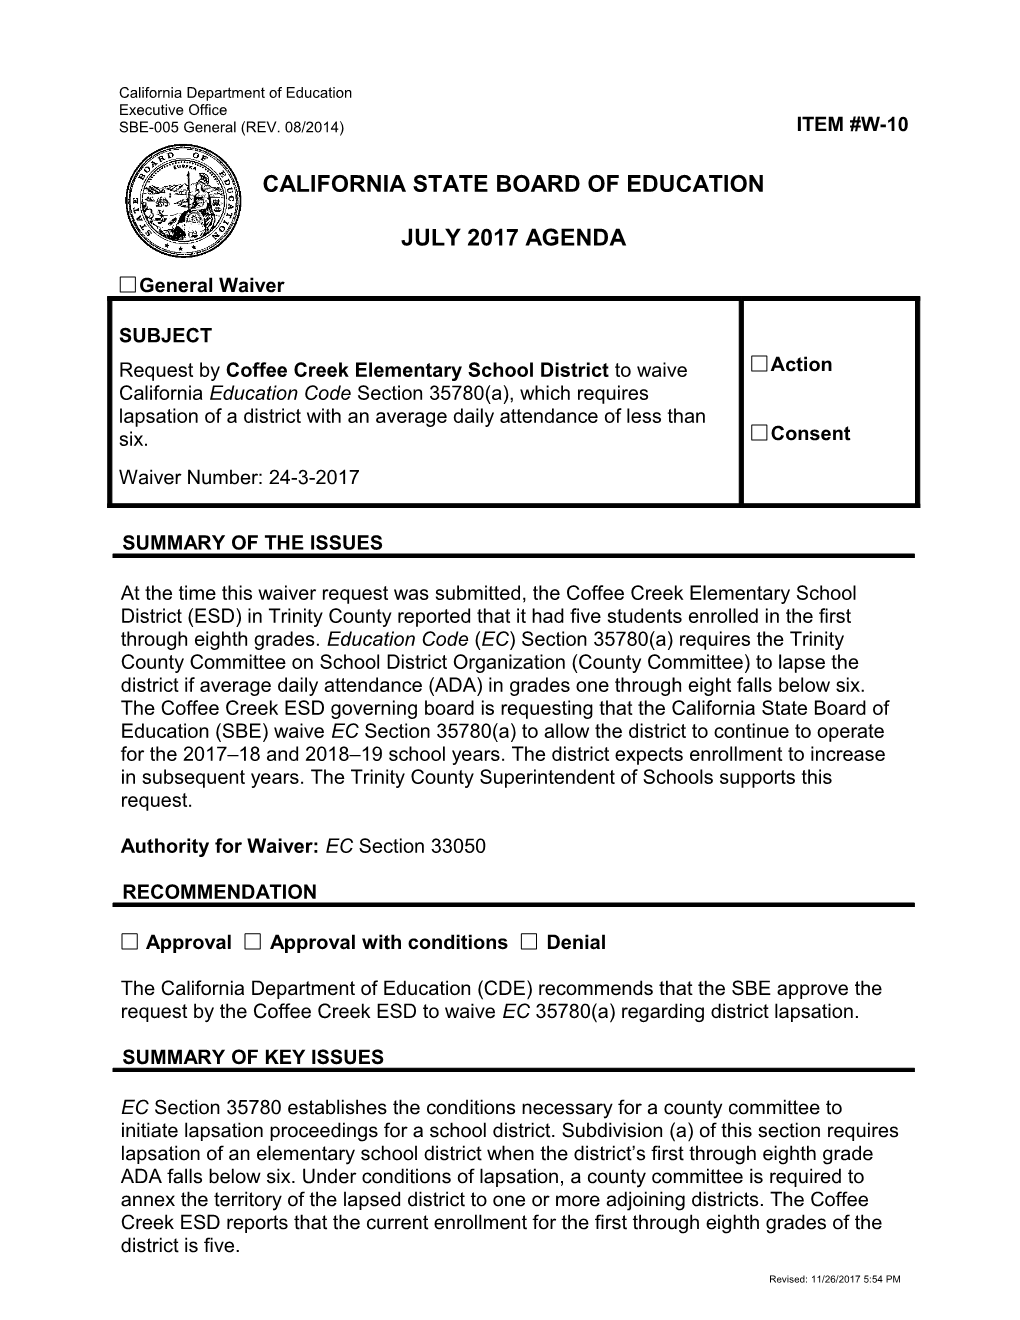 July 2017 Waiver Item W-10 - Meeting Agendas (CA State Board Of Education)